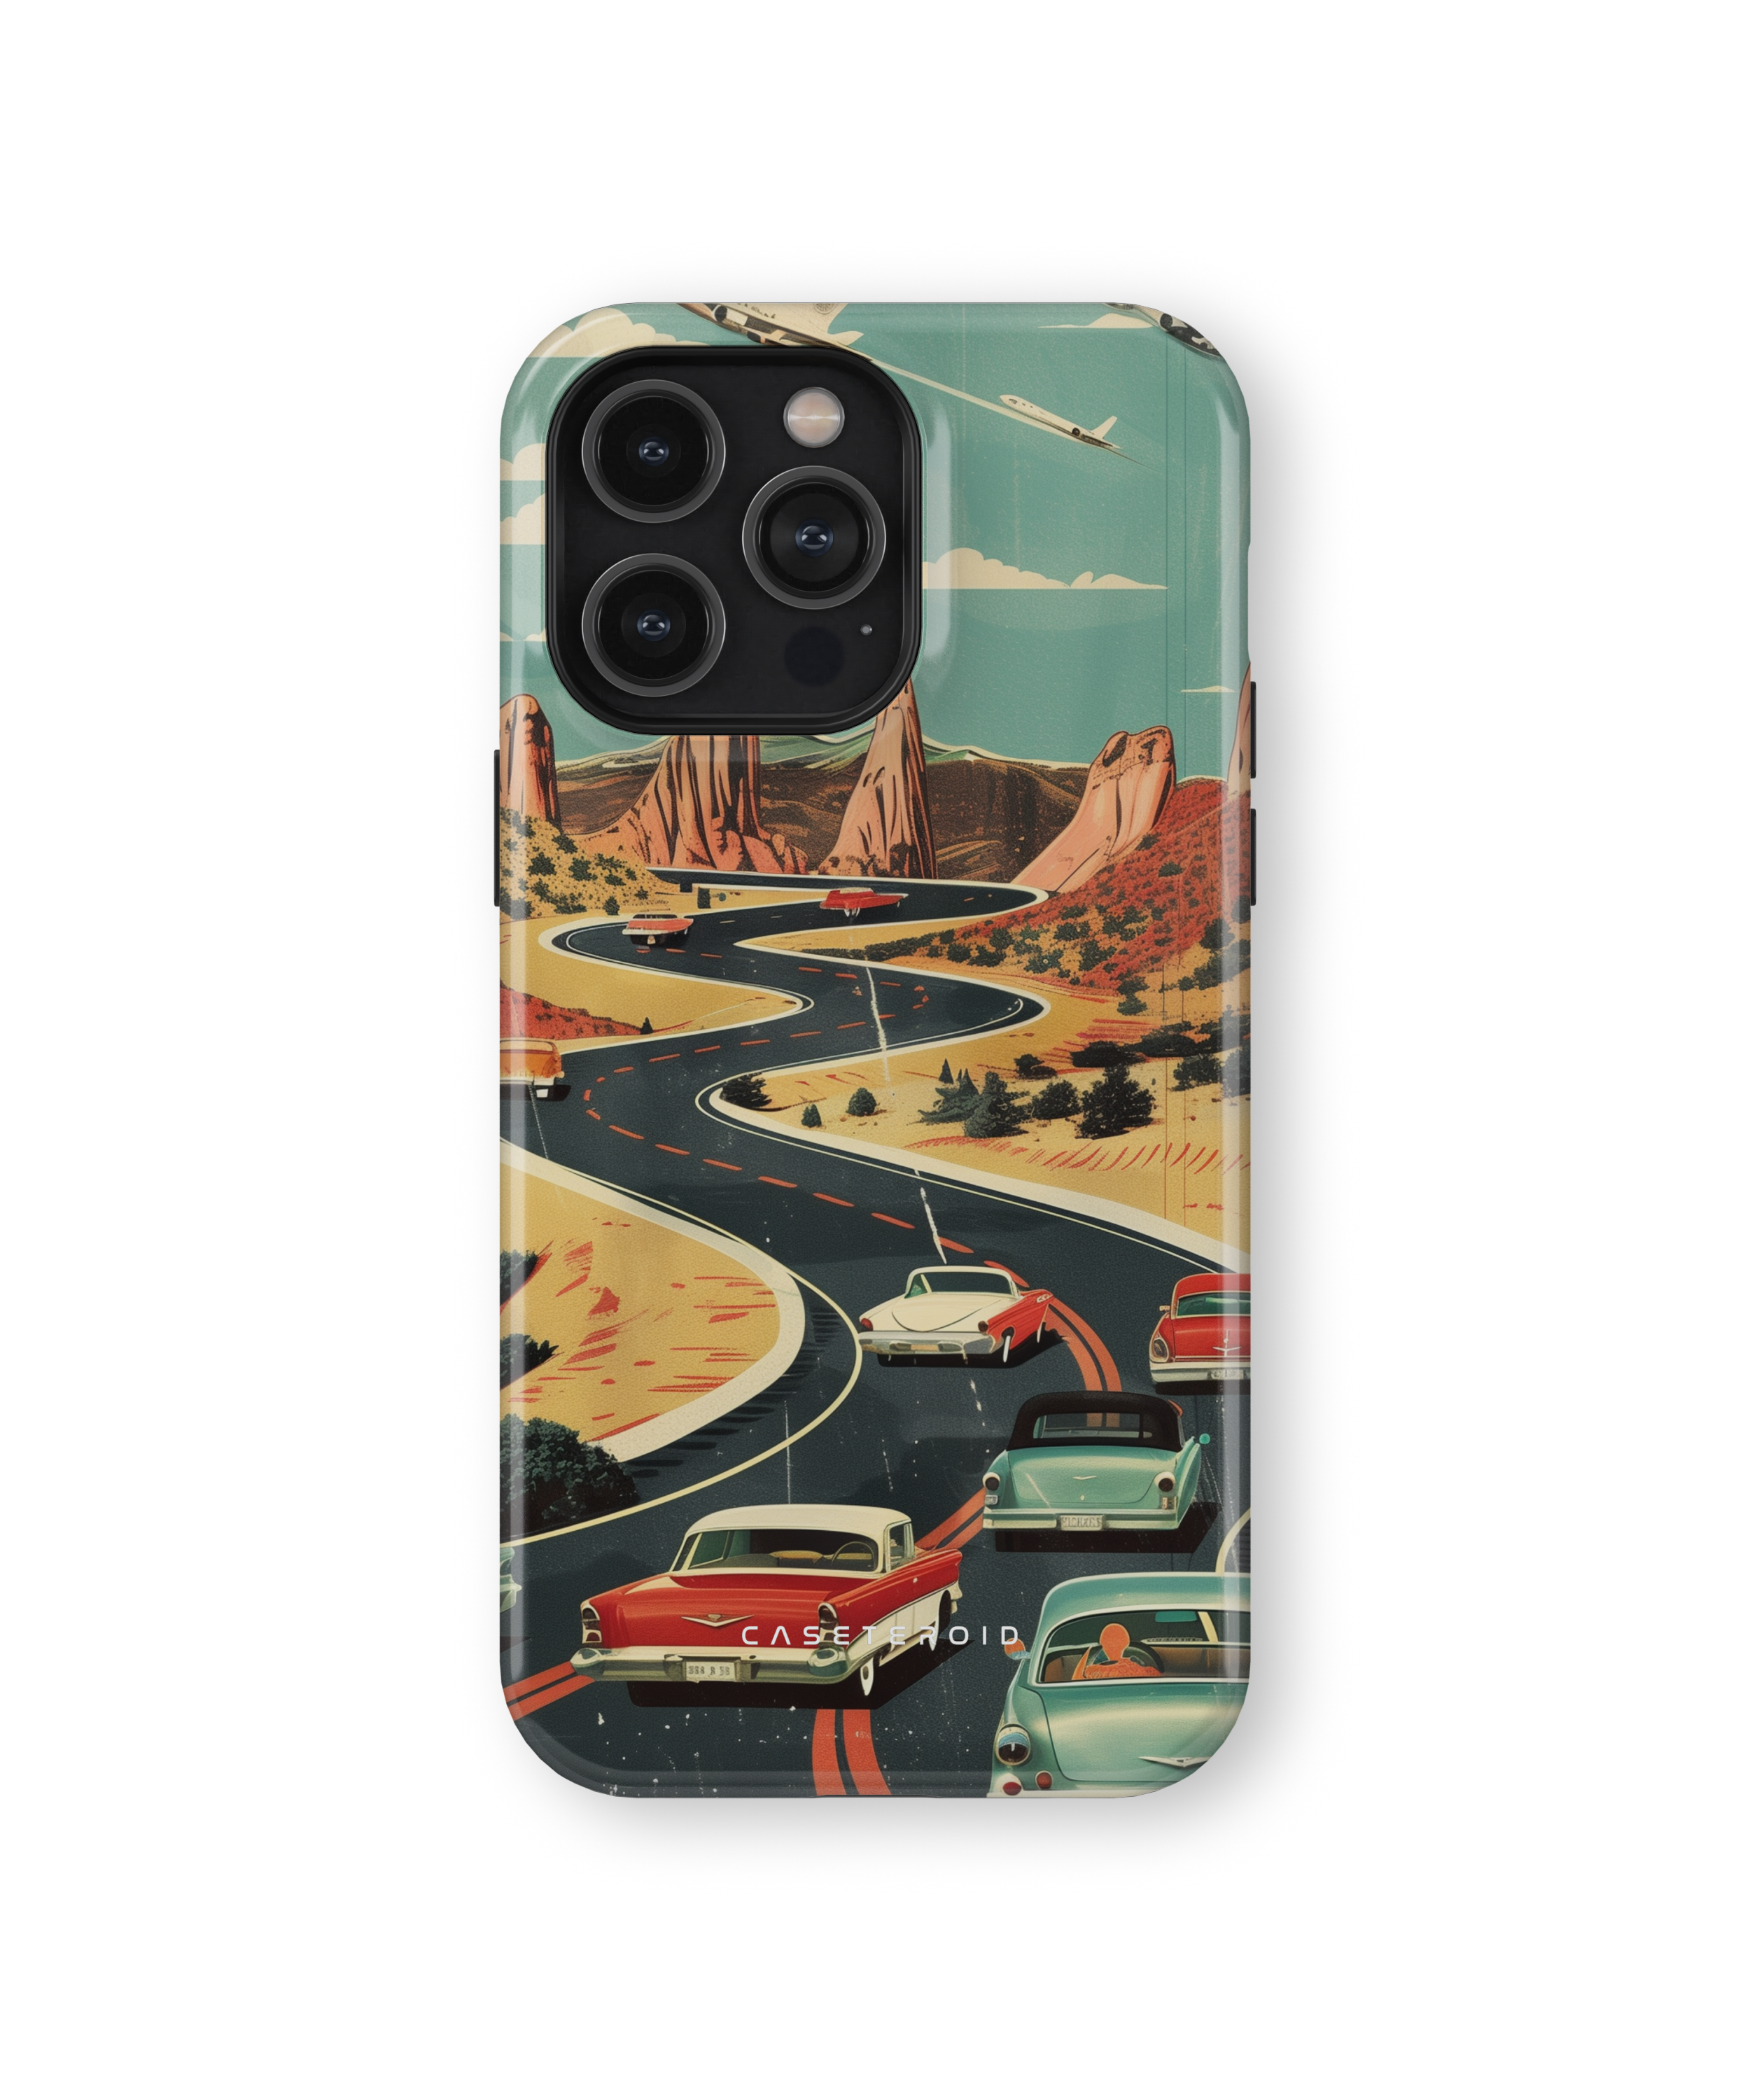 iPhone Tough Case with MagSafe - Vintage Journey Route - CASETEROID